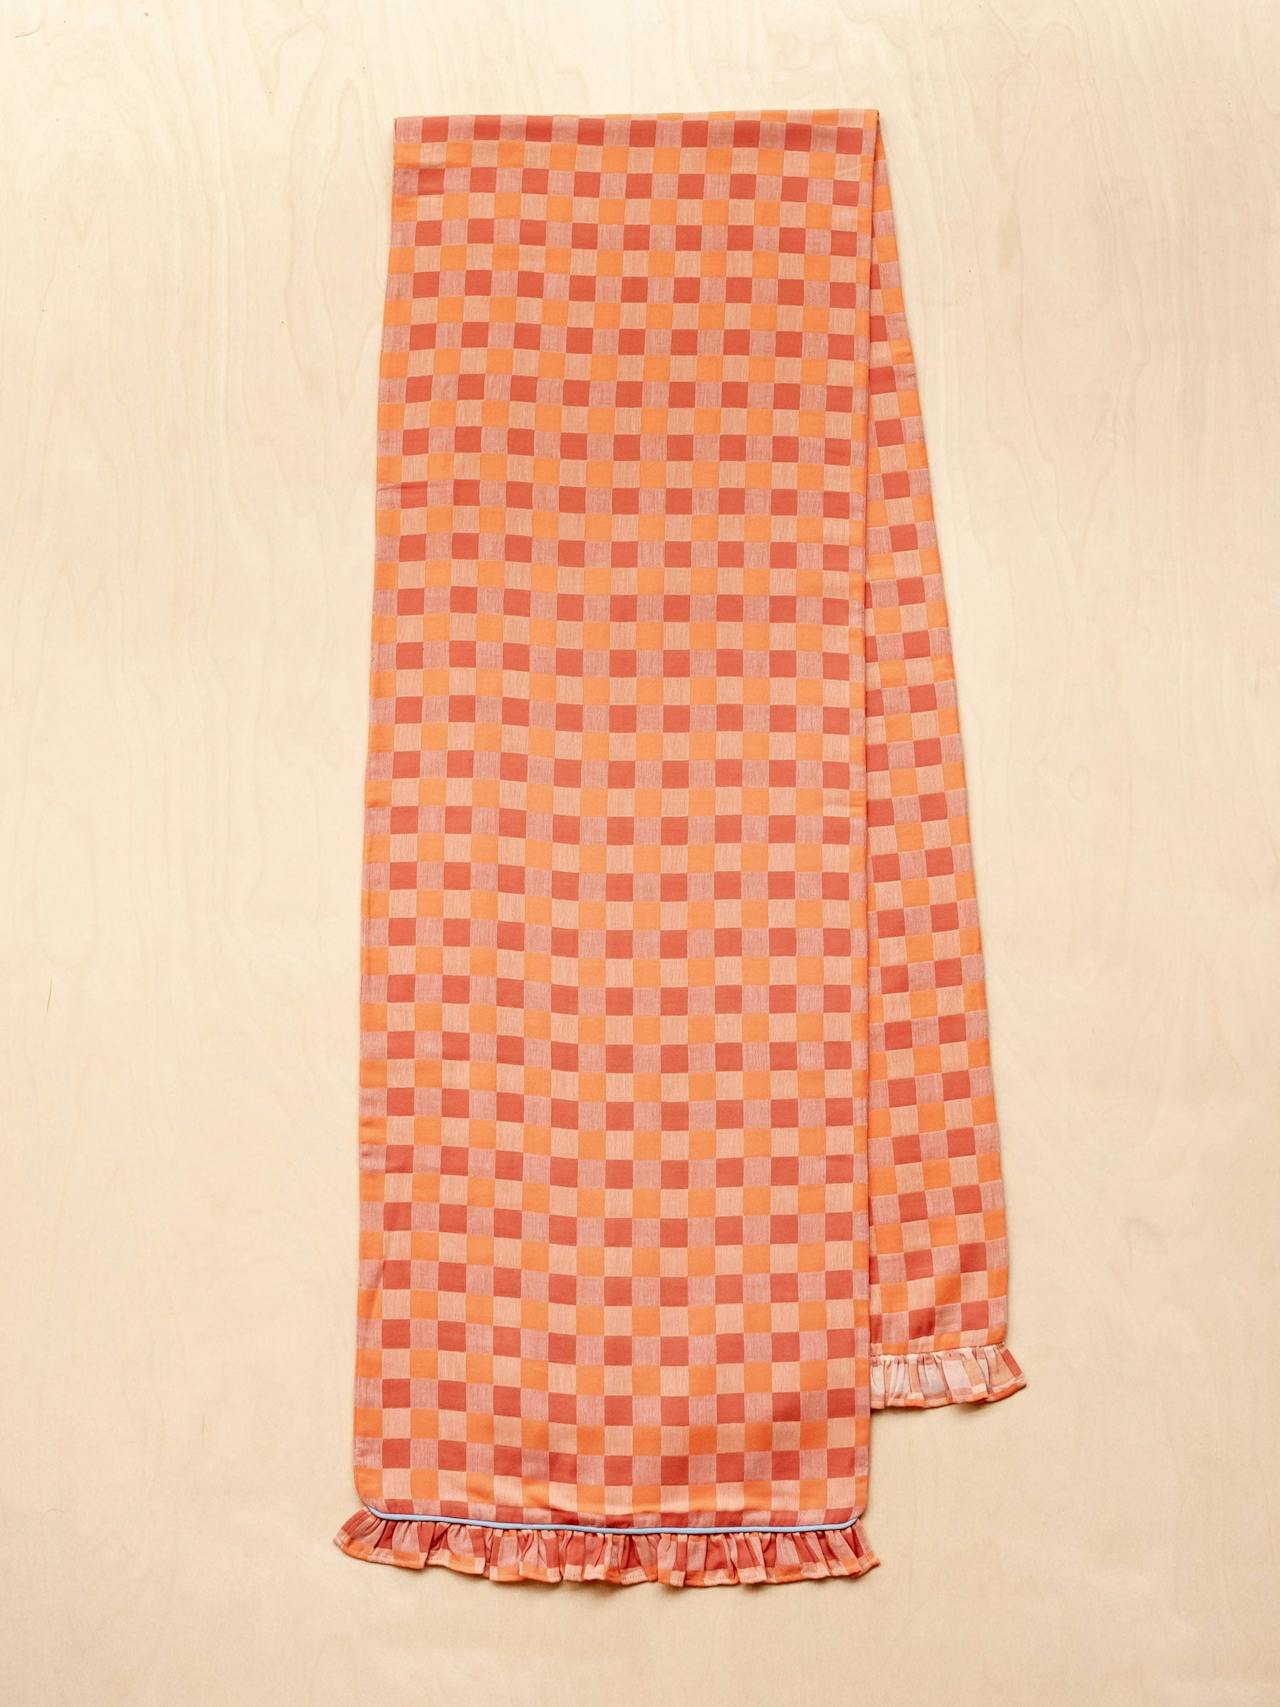 Cotton table runner in apricot checkerboard